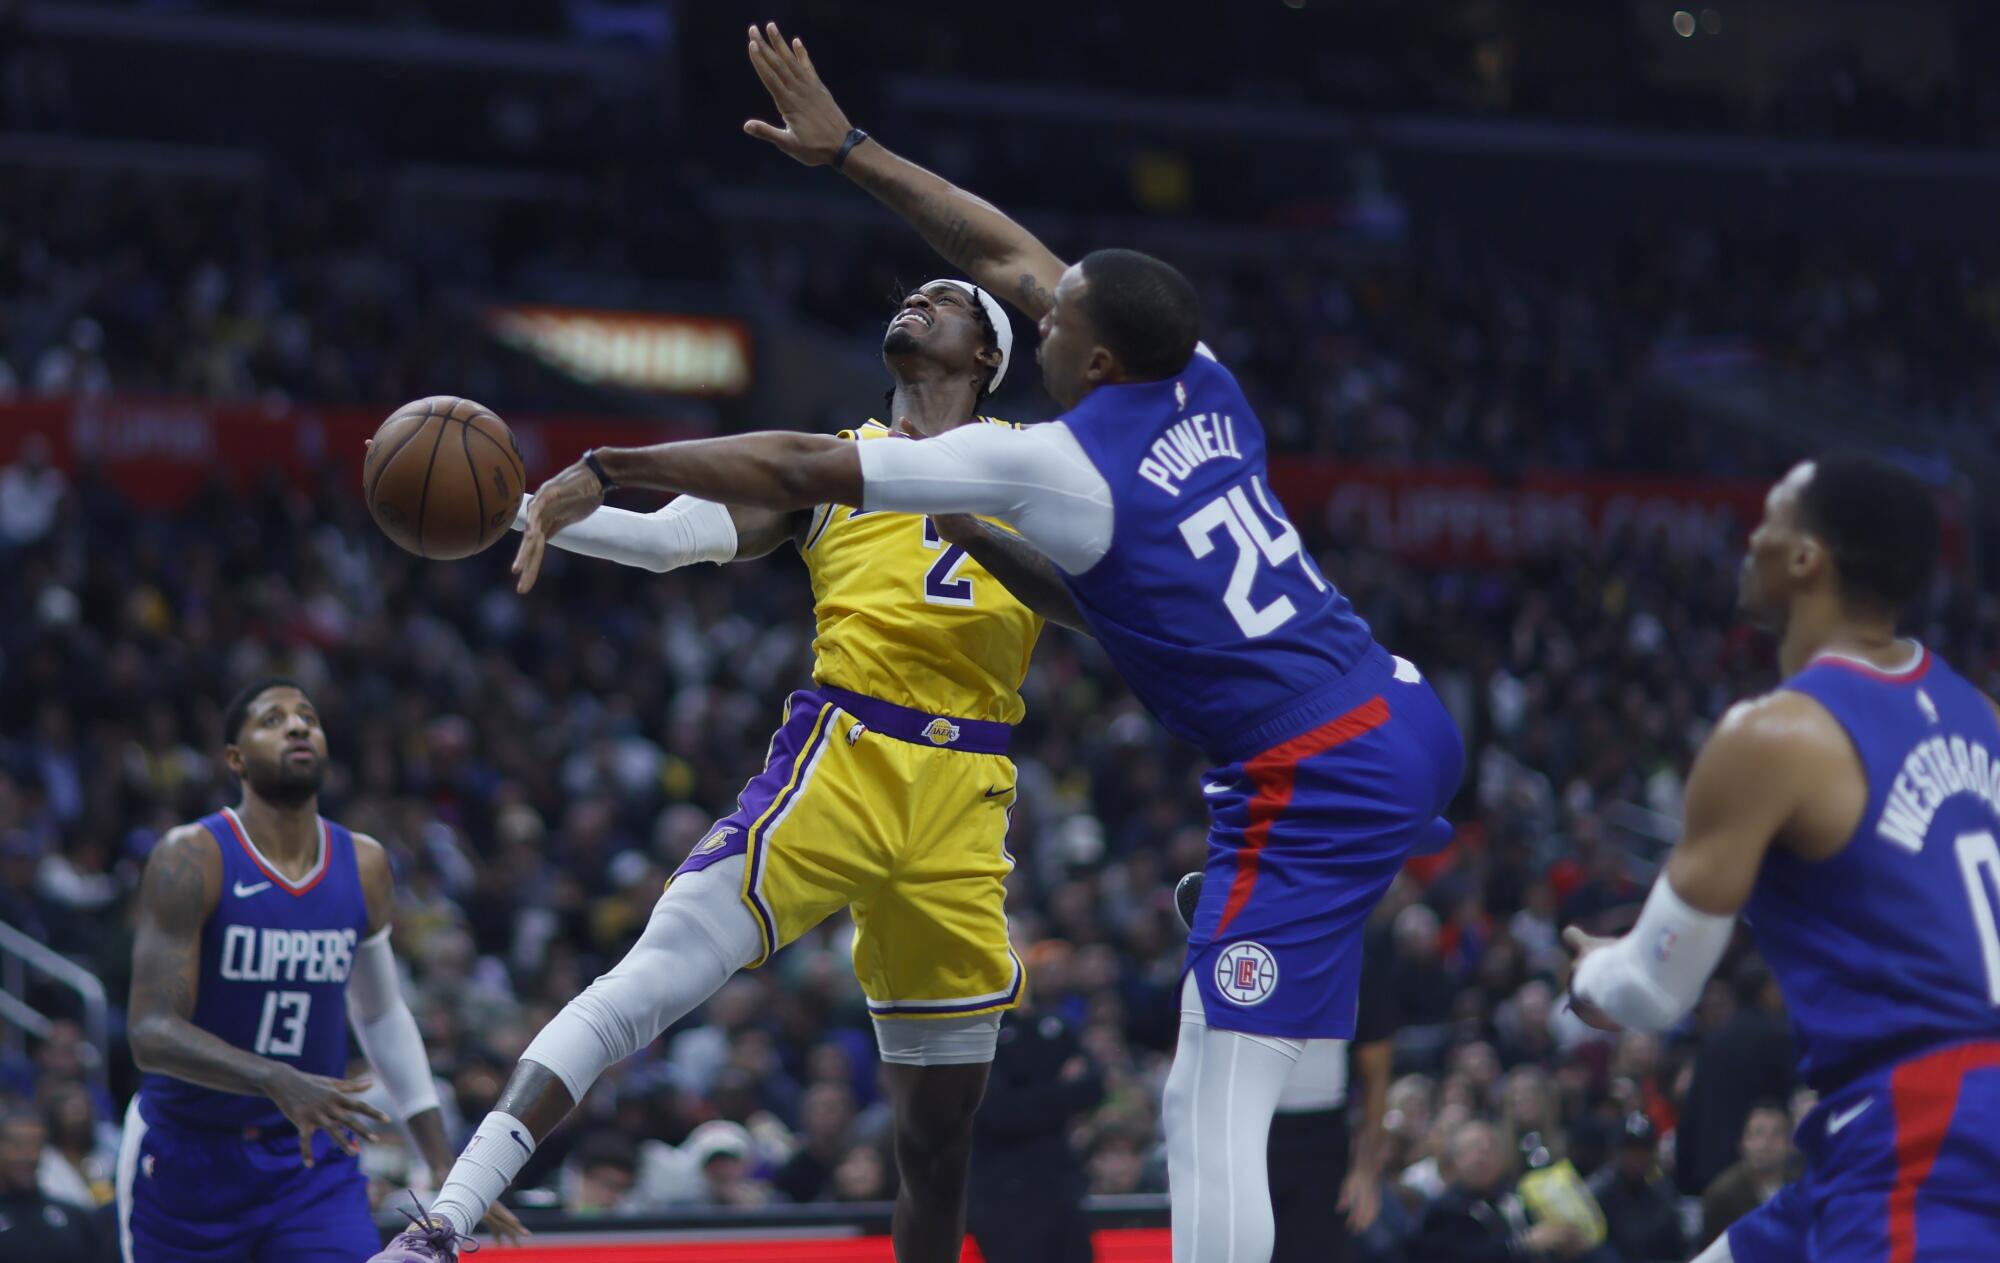 Lakers forward Jarred Vanderbilt has his layup contested by Clippers guard Norman Powell during a game in January.